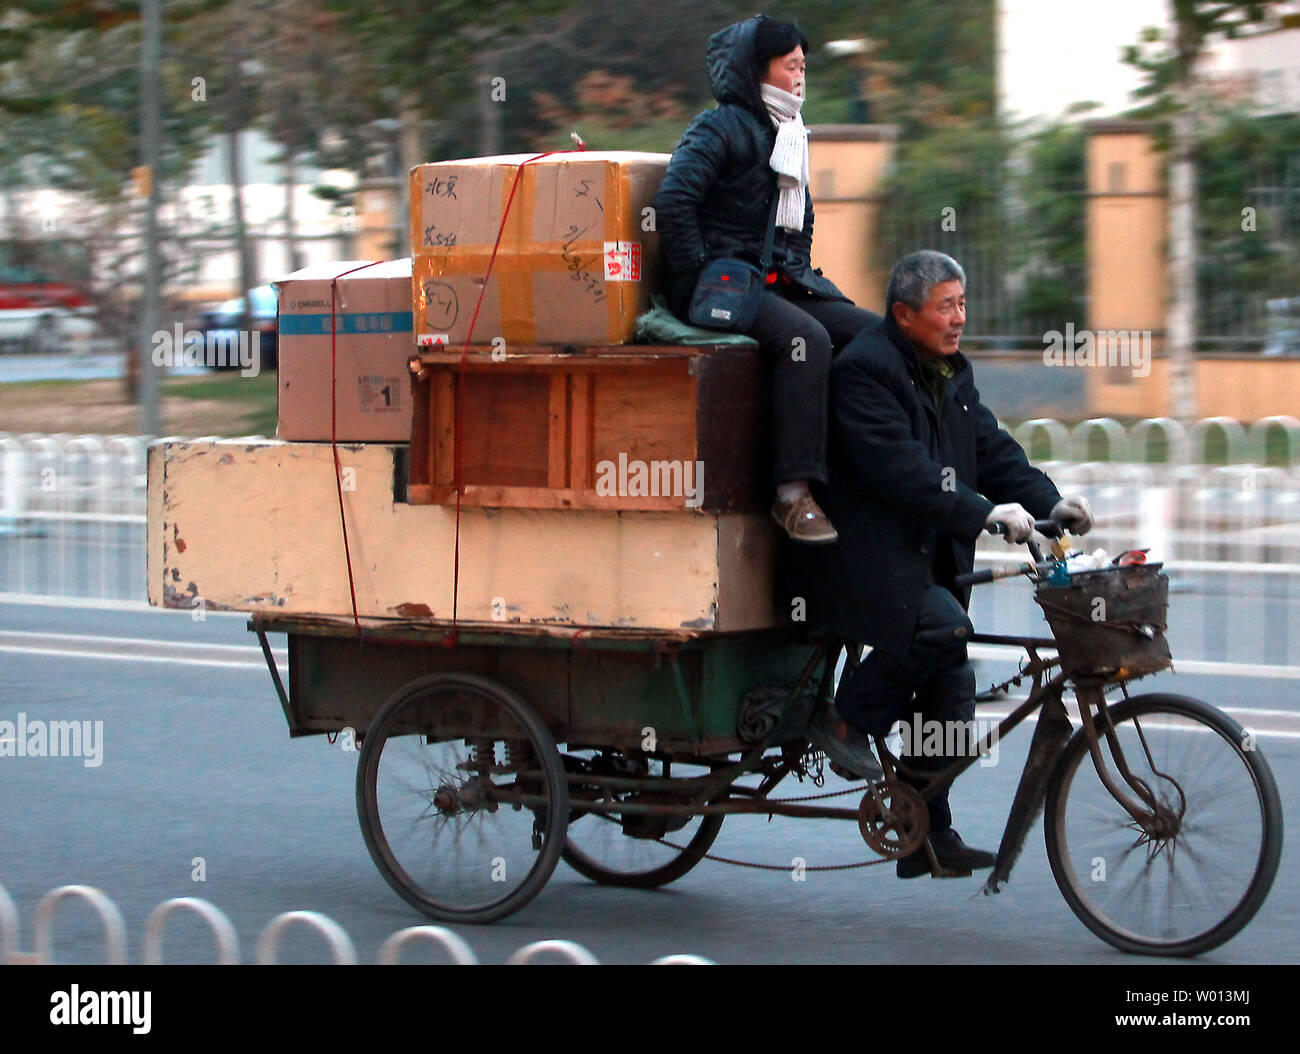 A Chinese couple transports old furniture on their 3-wheel wagon in downtown Beijing on November 16, 2013.  China, one of the world's fastest  growing countries and economies over the past three decades, is facing a long-term decline in its economic growth rate, according to a top Chinese economic  and political strategist .        UPI/Stephen Shaver Stock Photo